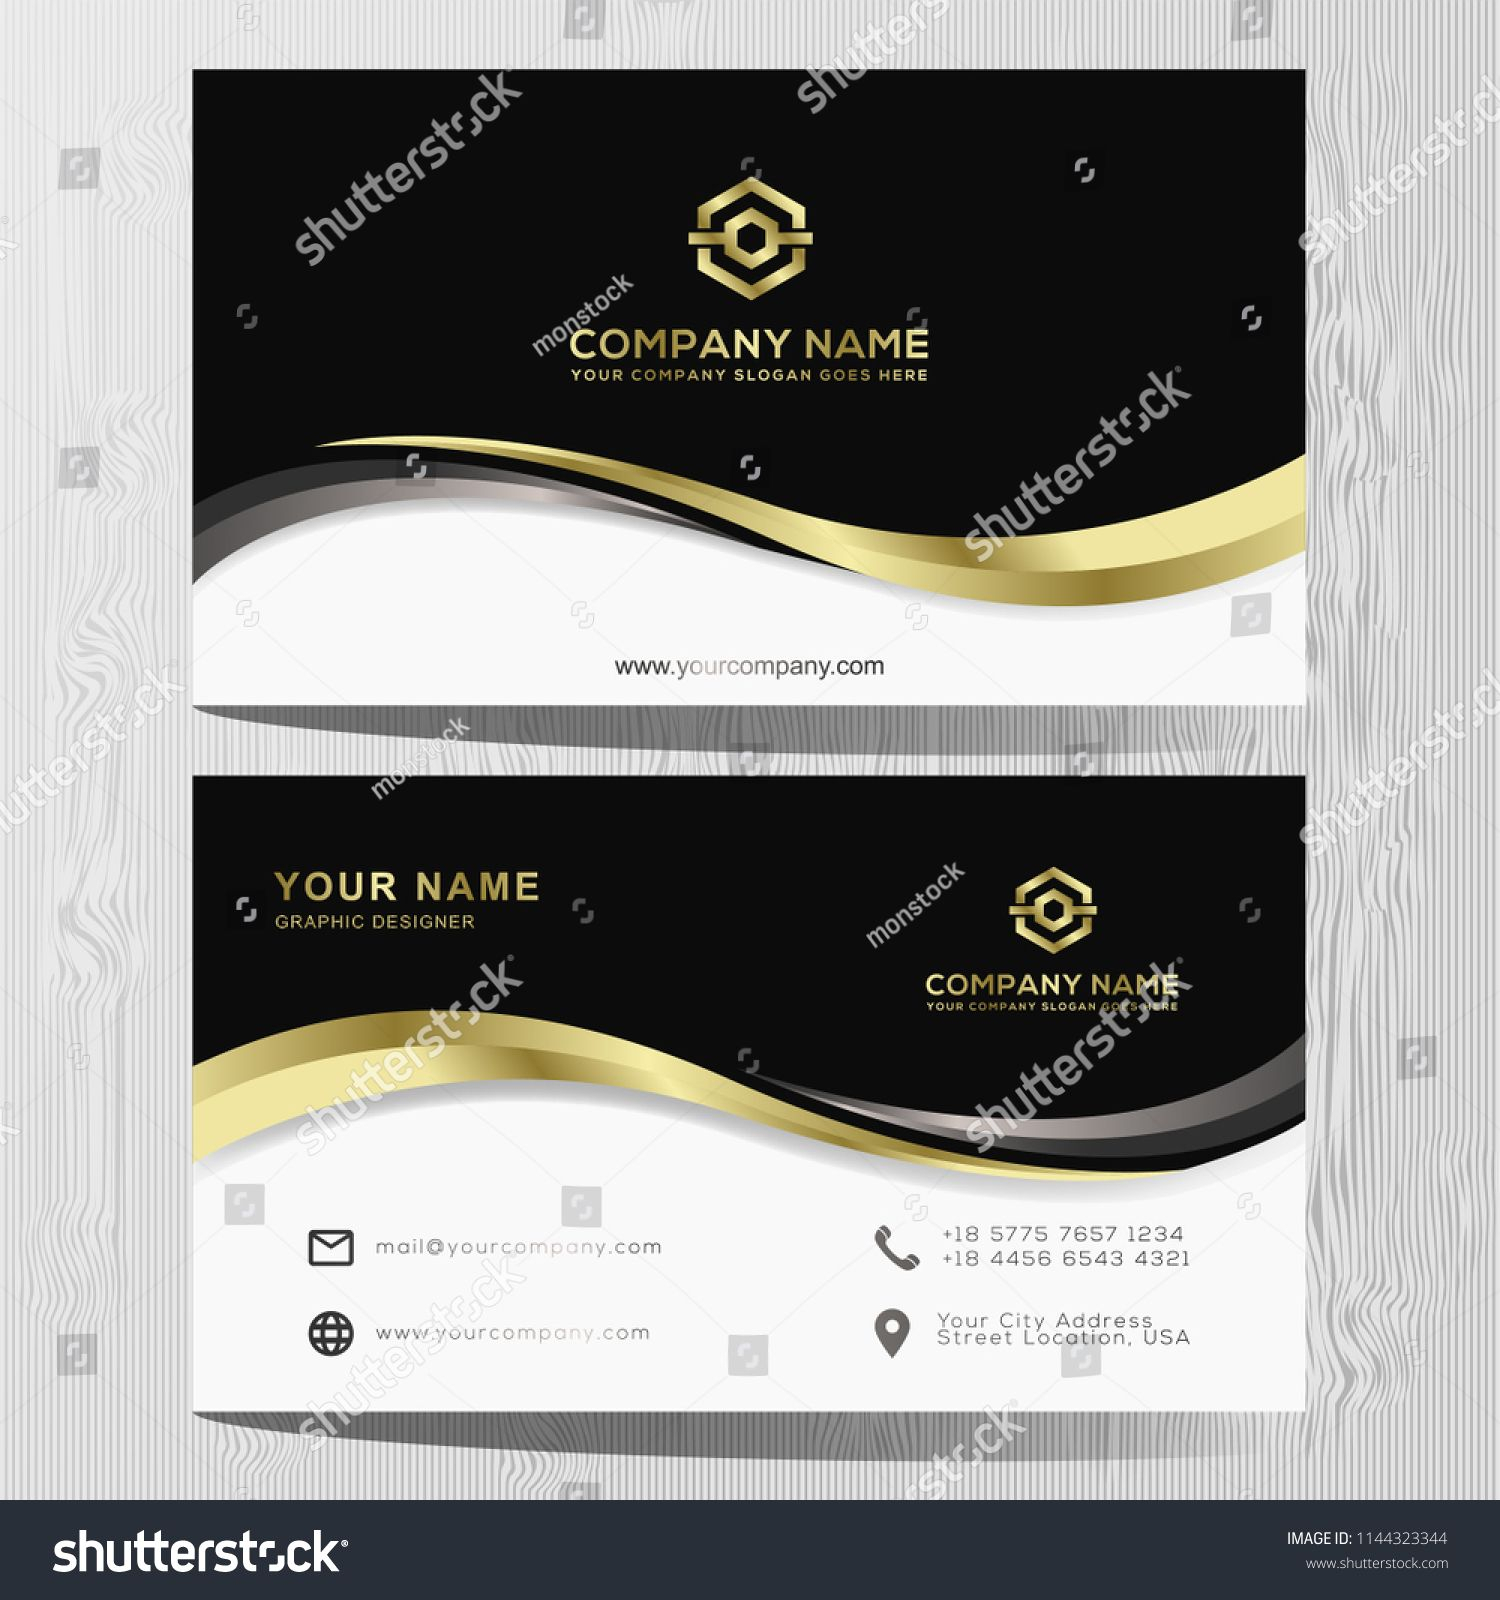 Luxury And Elegant Black Gold Business Cards Template On Regarding Advertising Cards Templates